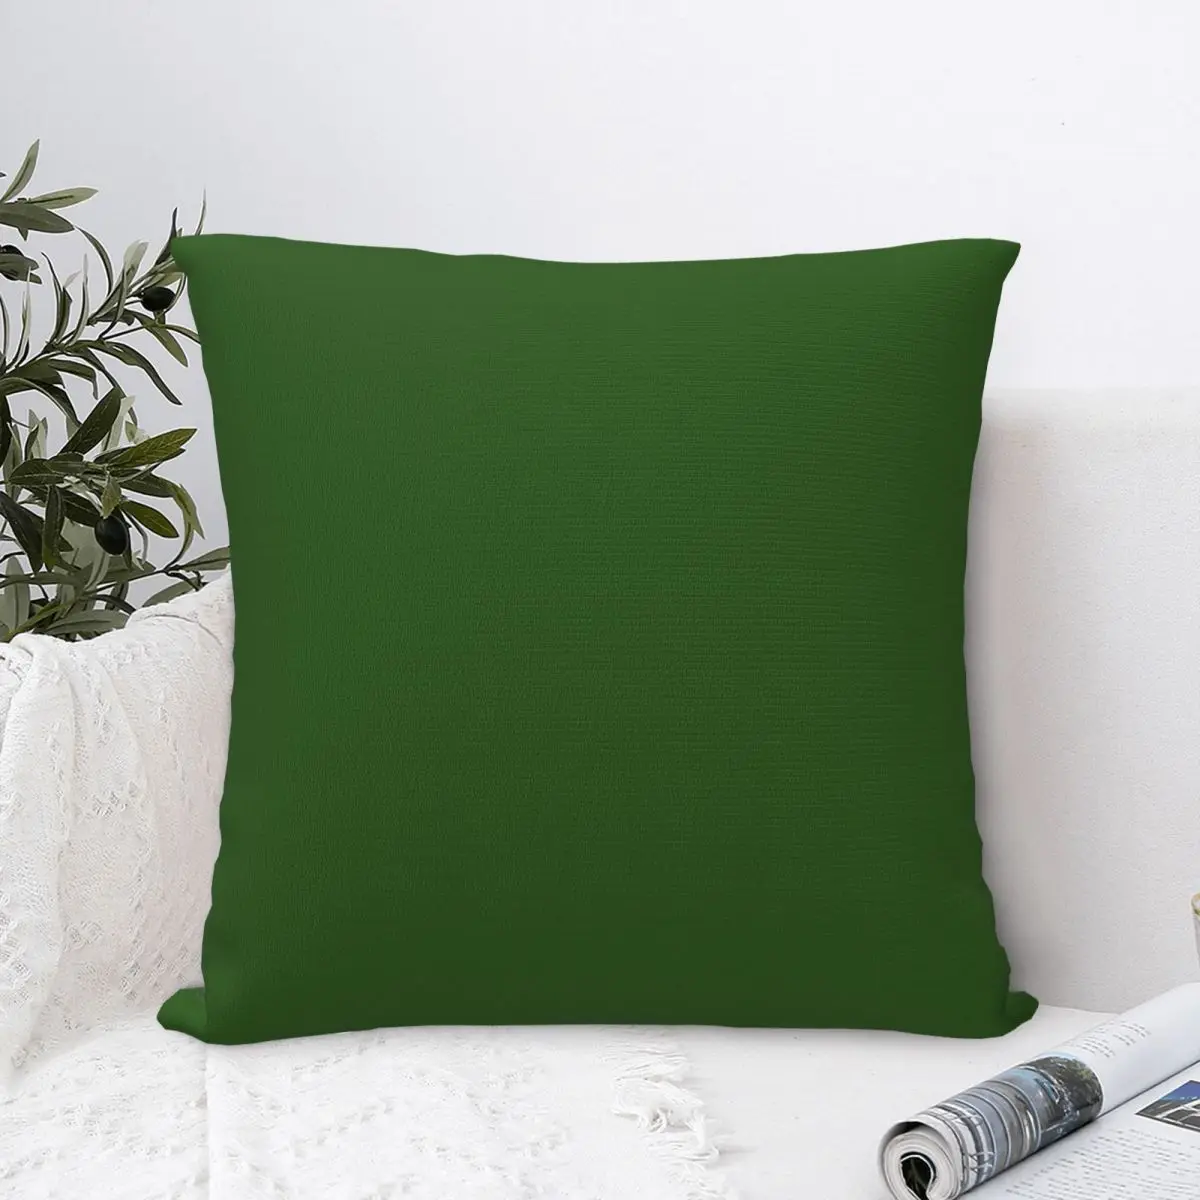 

PLAIN SOLID COLOR NEON FLUROESCENT GREEN Square Pillowcase Cushion Cover Decorative Pillow Case Polyester Throw Pillow cover